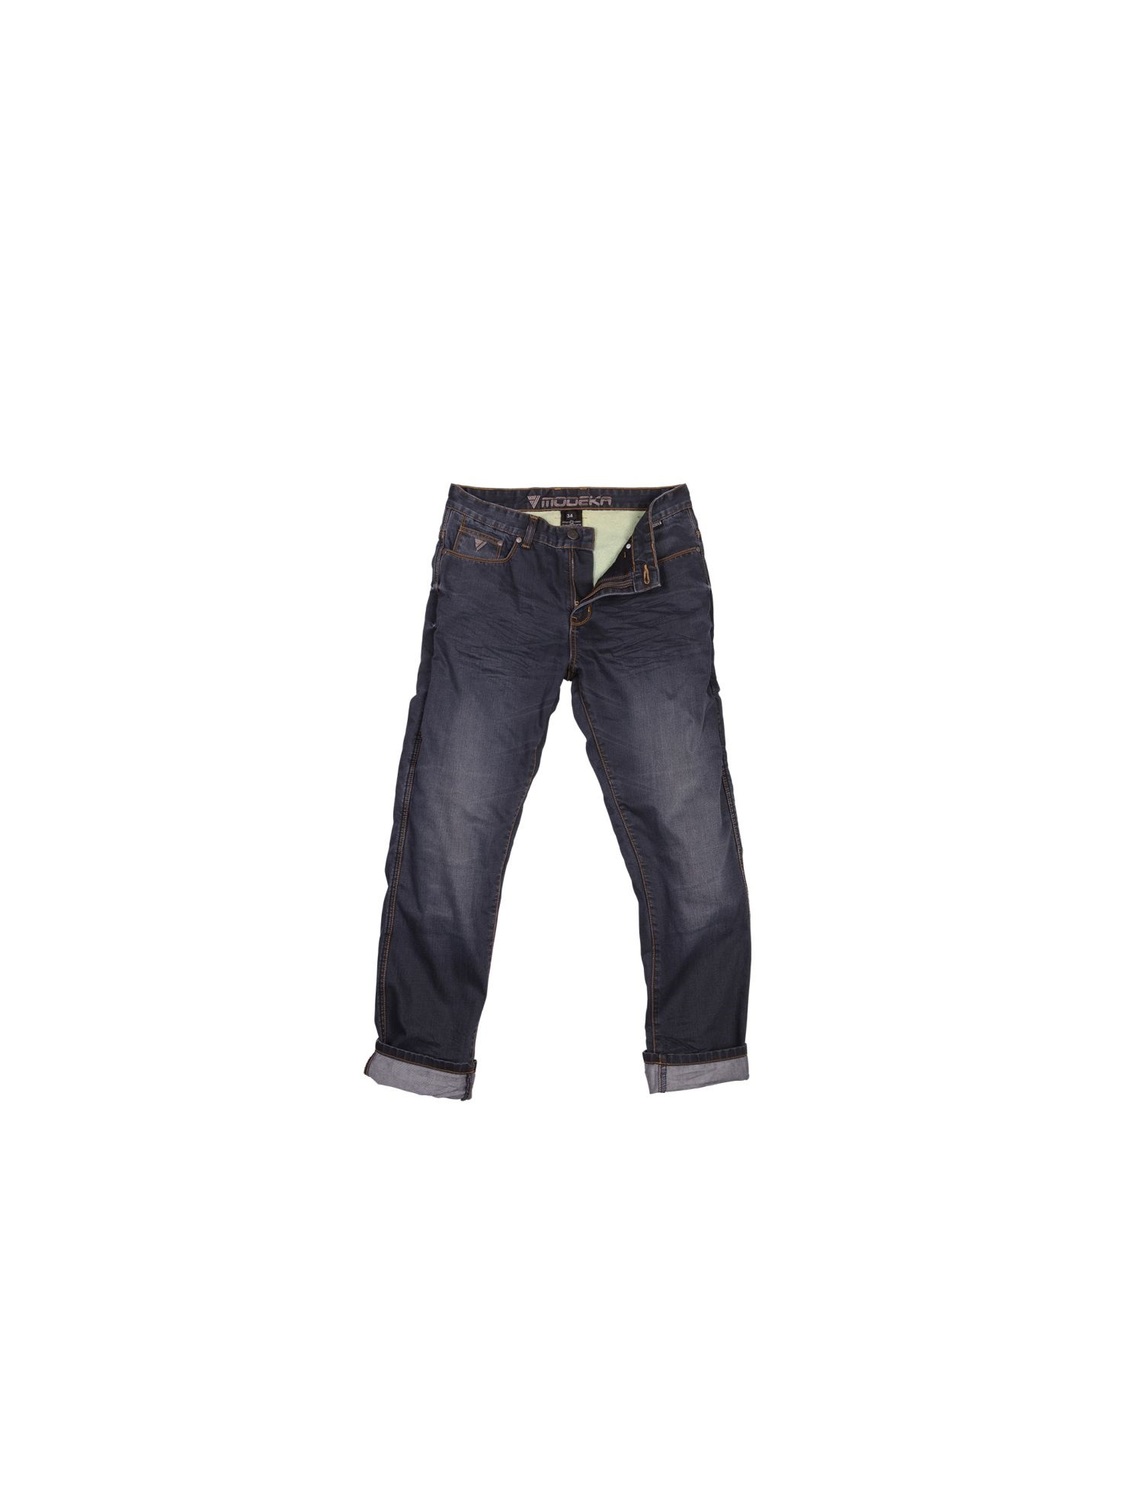 <span style="font-weight: bold;">БРЮКИ MODEKA JEANS SIR THOMAS BLUE</span>&nbsp;